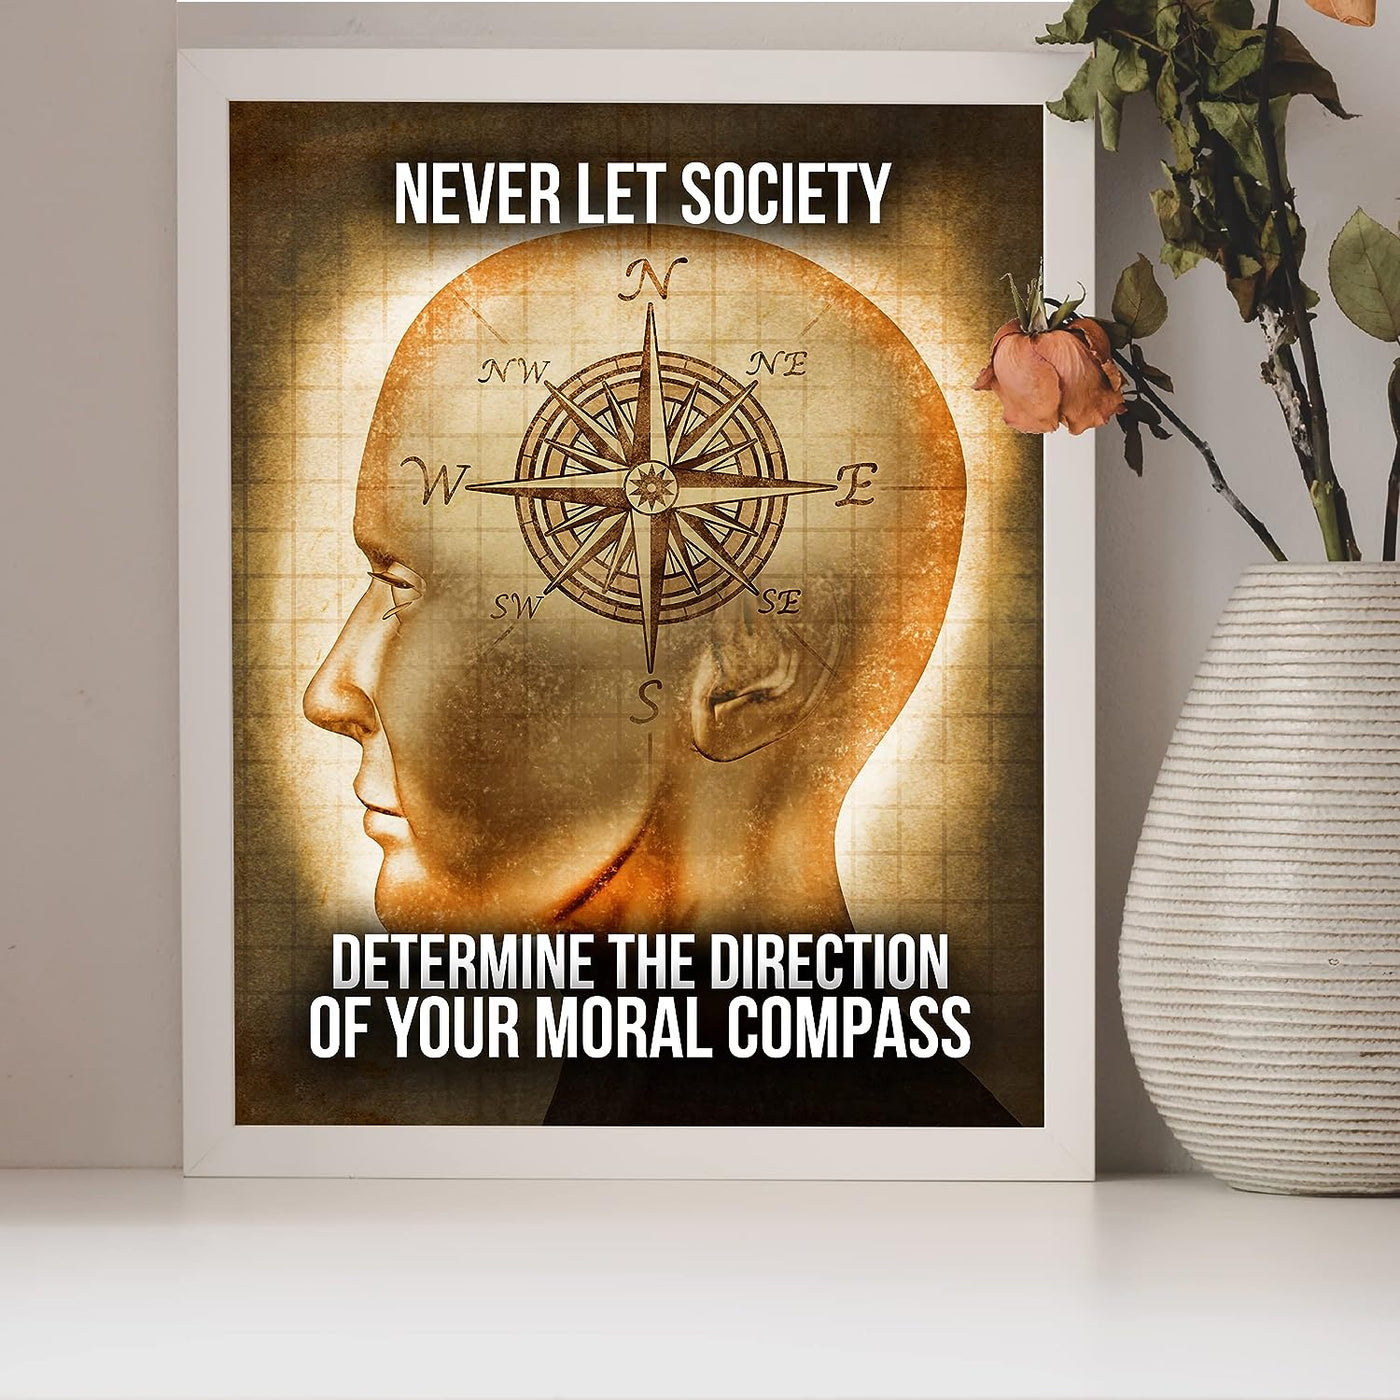 Never Let Society Determine Direction of Your Moral Compass-Political Wall Decor -8 x 10" Motivational Art Print -Ready to Frame. Inspirational Home-Office-Garage-Bar-Cave Decor. Great Reminder!